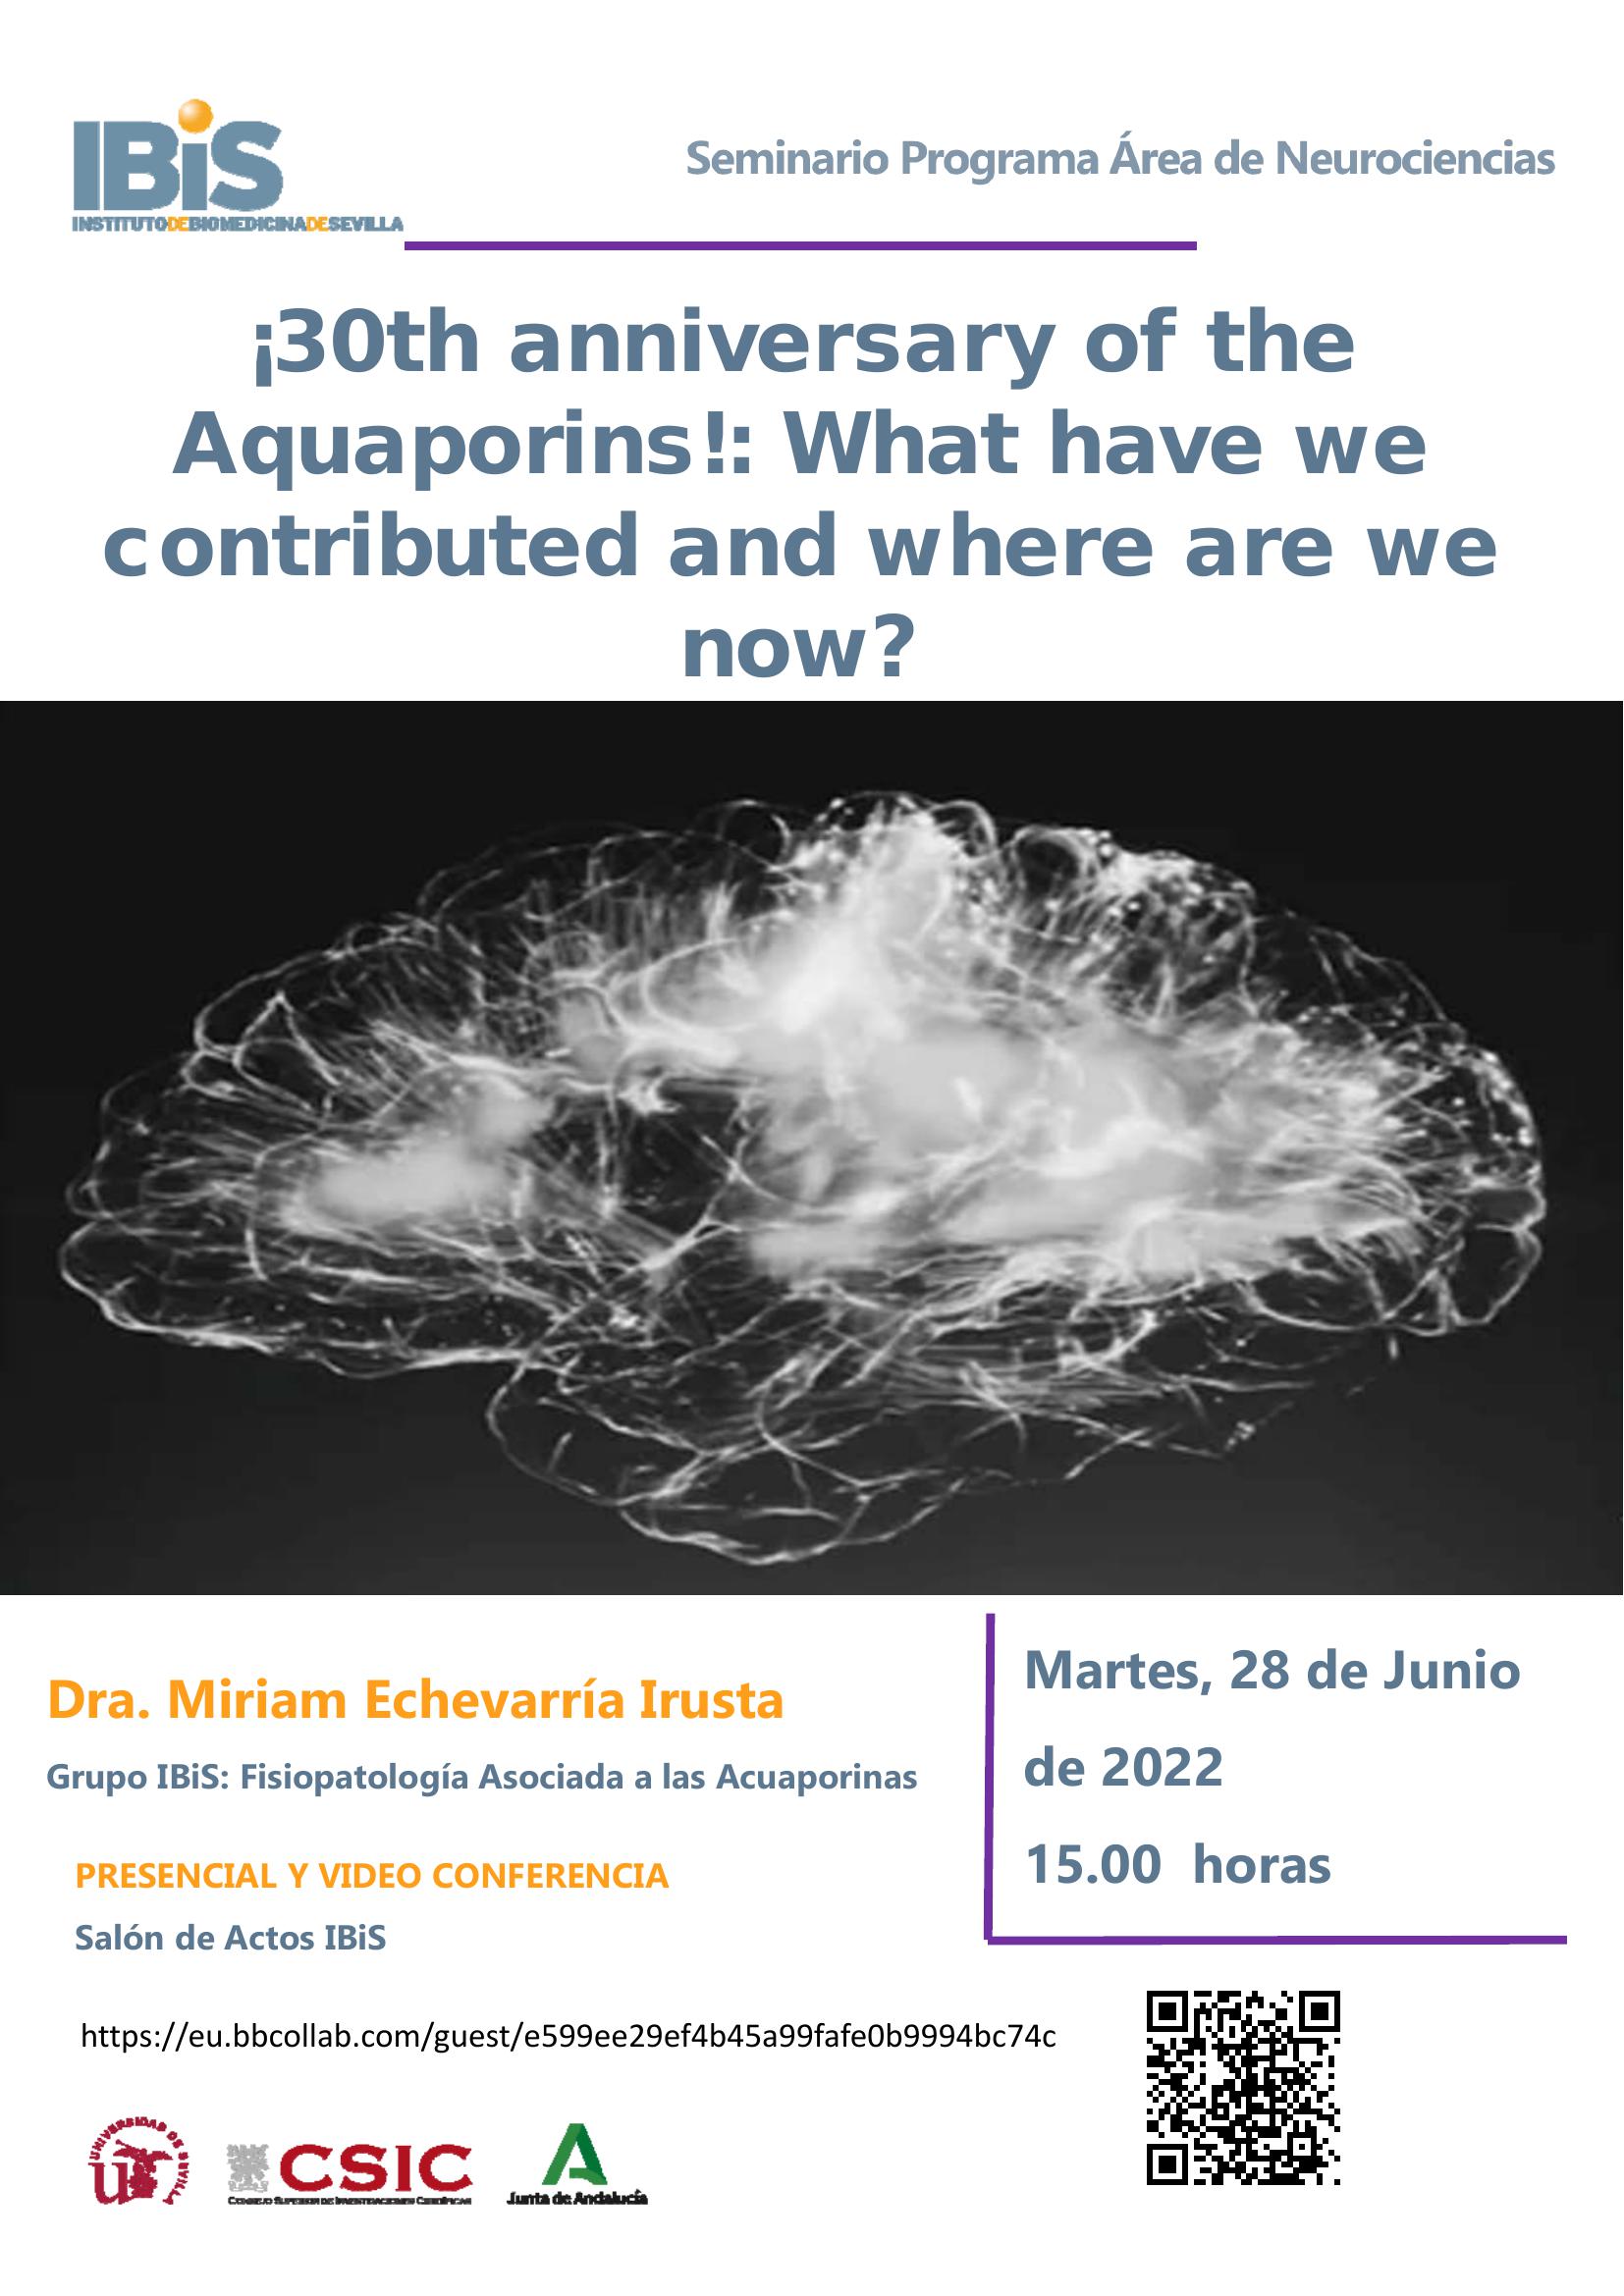 Poster: ¡30th anniversary of the Aquaporins!: What have we contributed and where are we now?